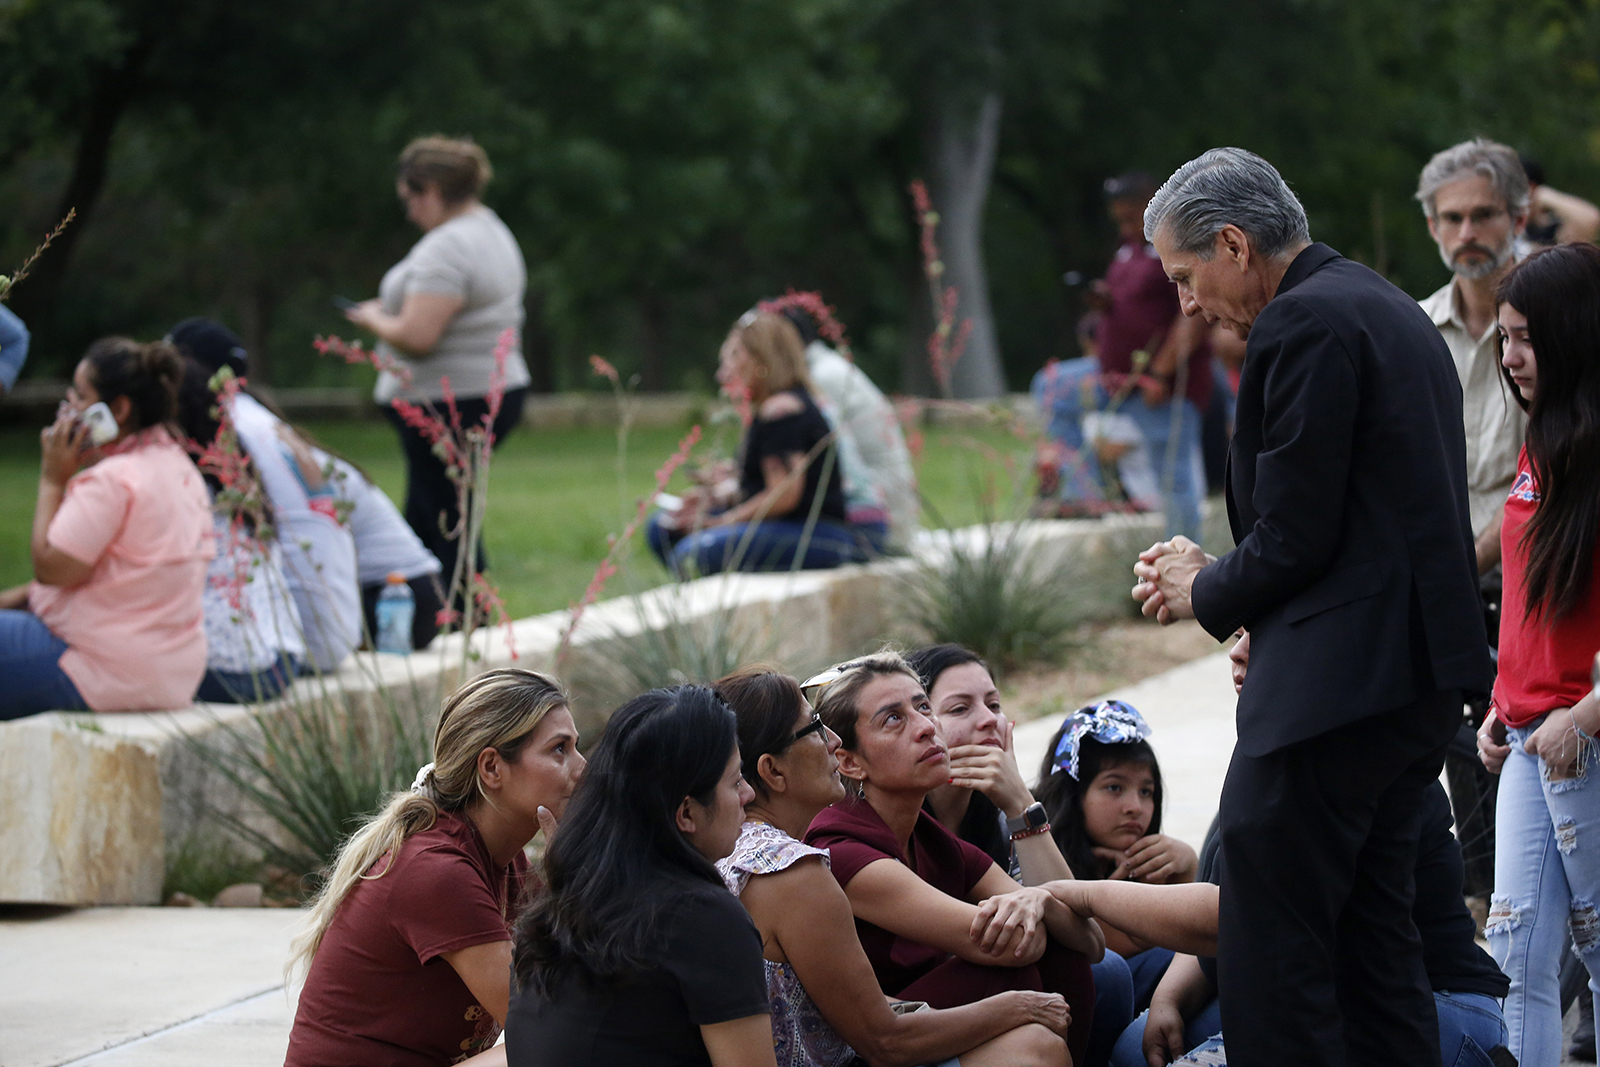 The archbishop of San Antonio, Gustavo García-Siller, right, comforts families outside the Civic Center following a deadly school shooting at Robb Elementary School in Uvalde, Texas, Tuesday, May 24, 2022. (AP Photo/Dario Lopez-Mills)